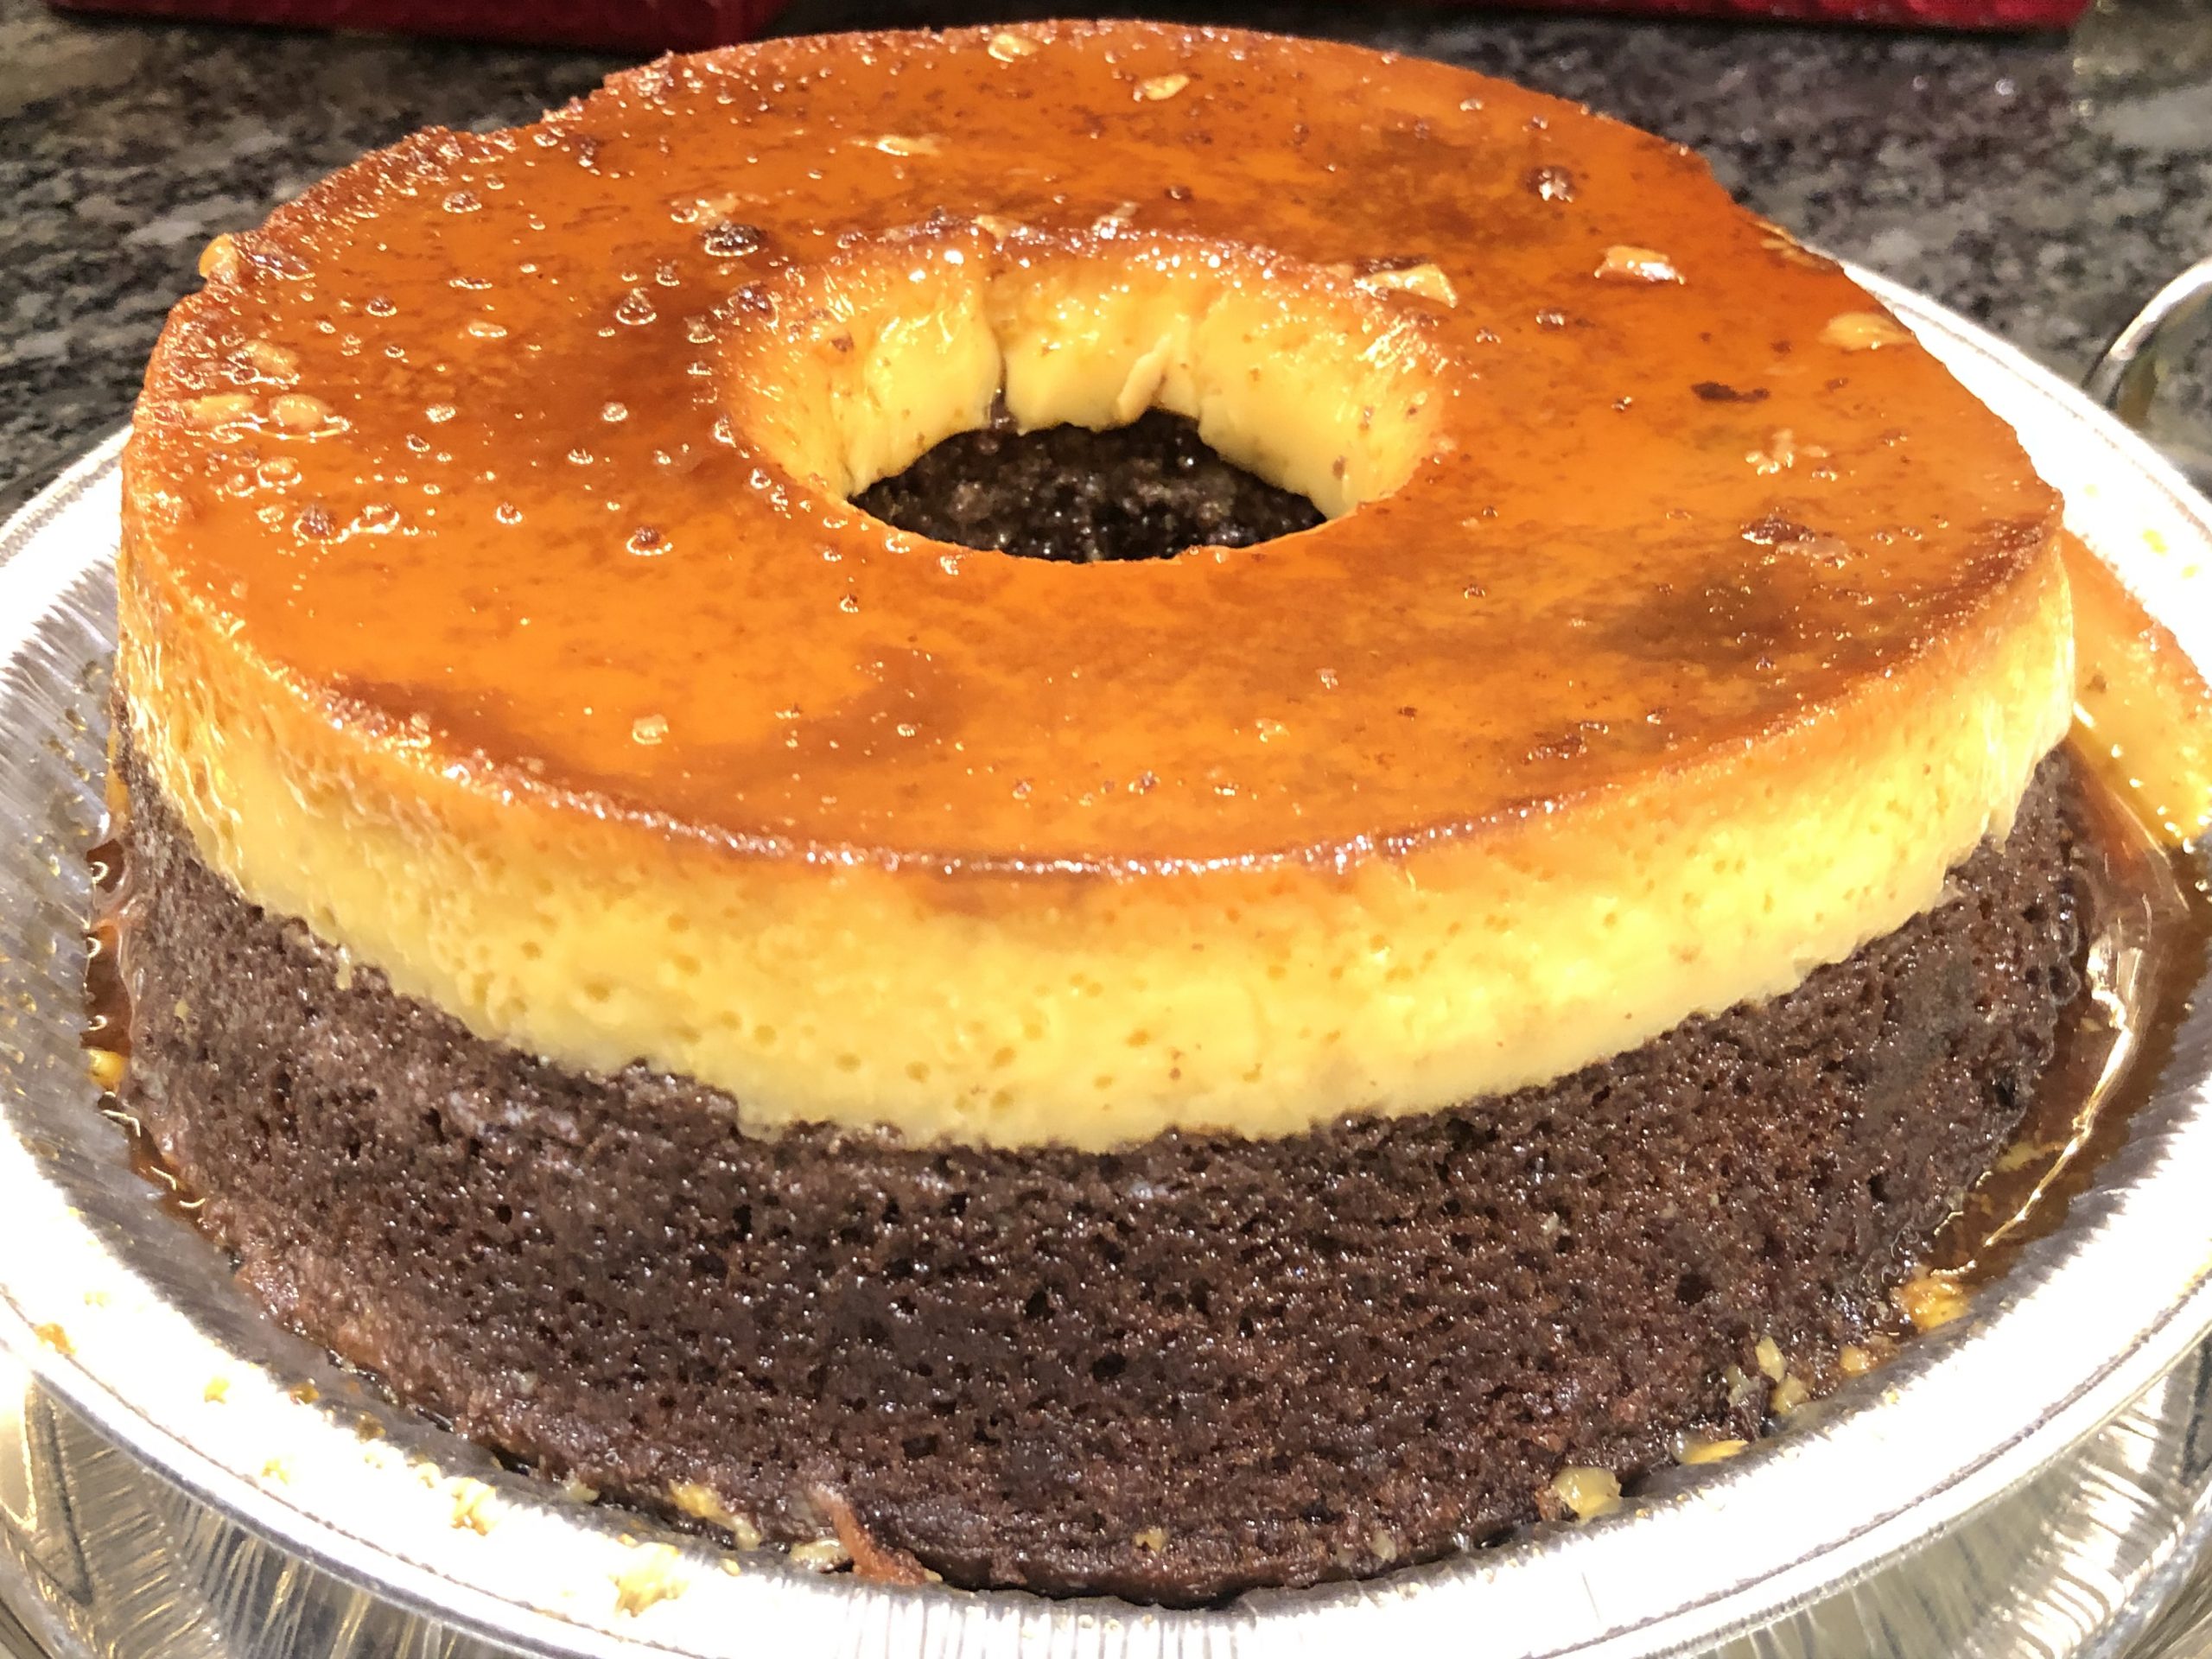 Mexican Chocoflan Impossible Cake Recipe (Magic Cake)